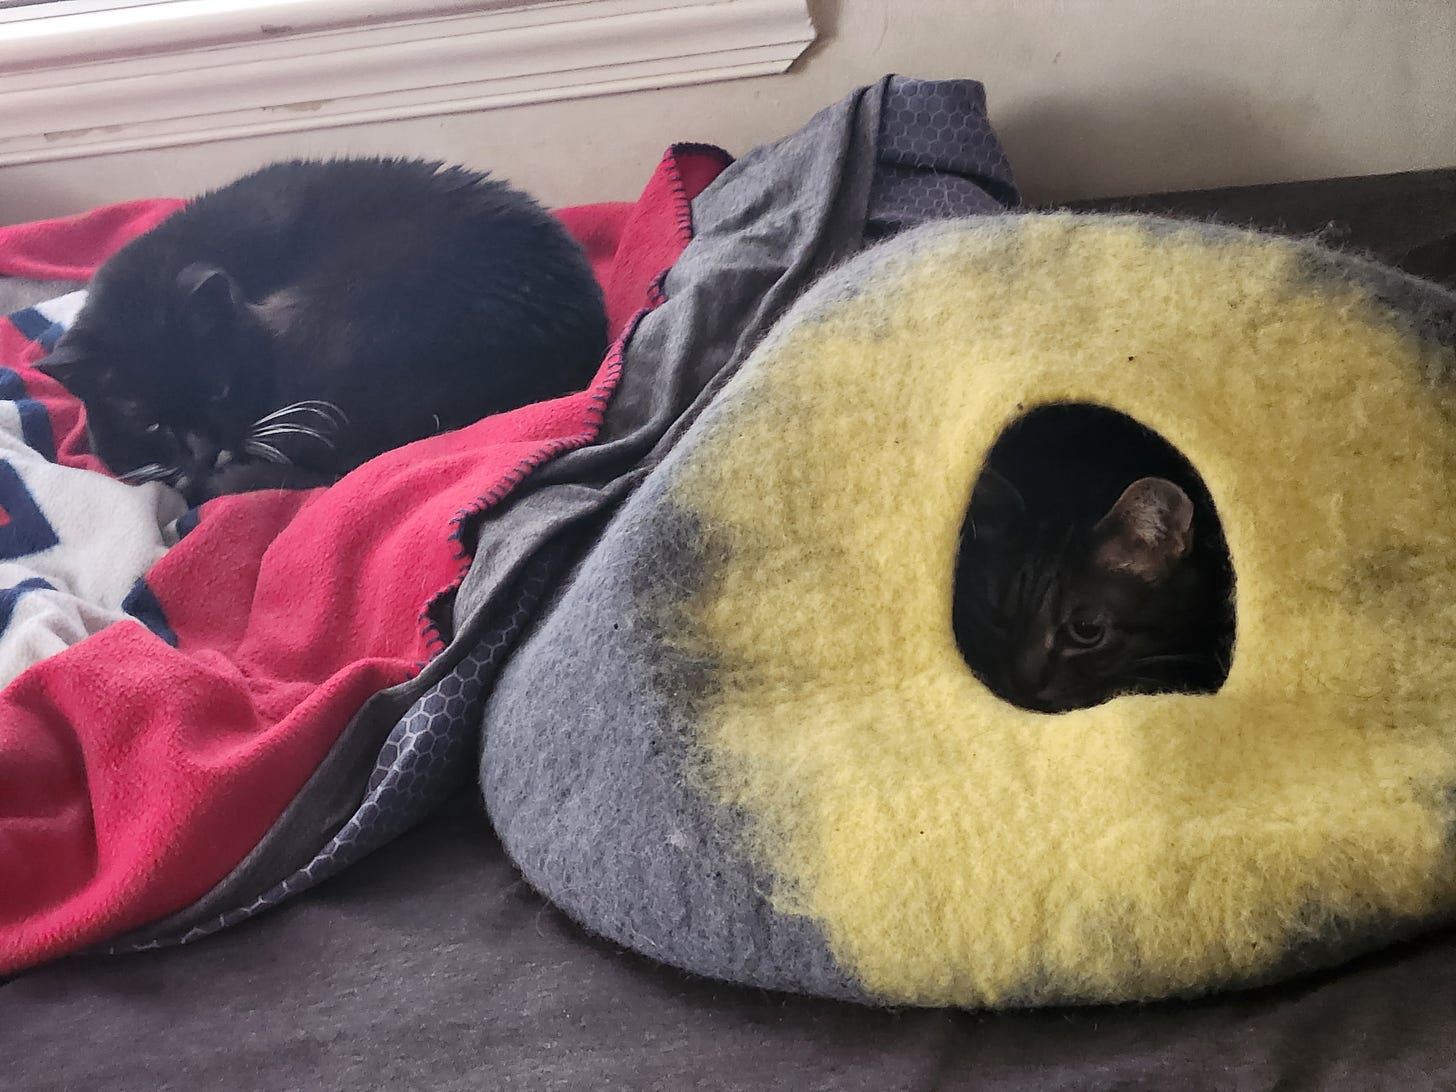 A black cat sits on a red blanket, a tabby inside a yellow and gray cave, both atop a bed